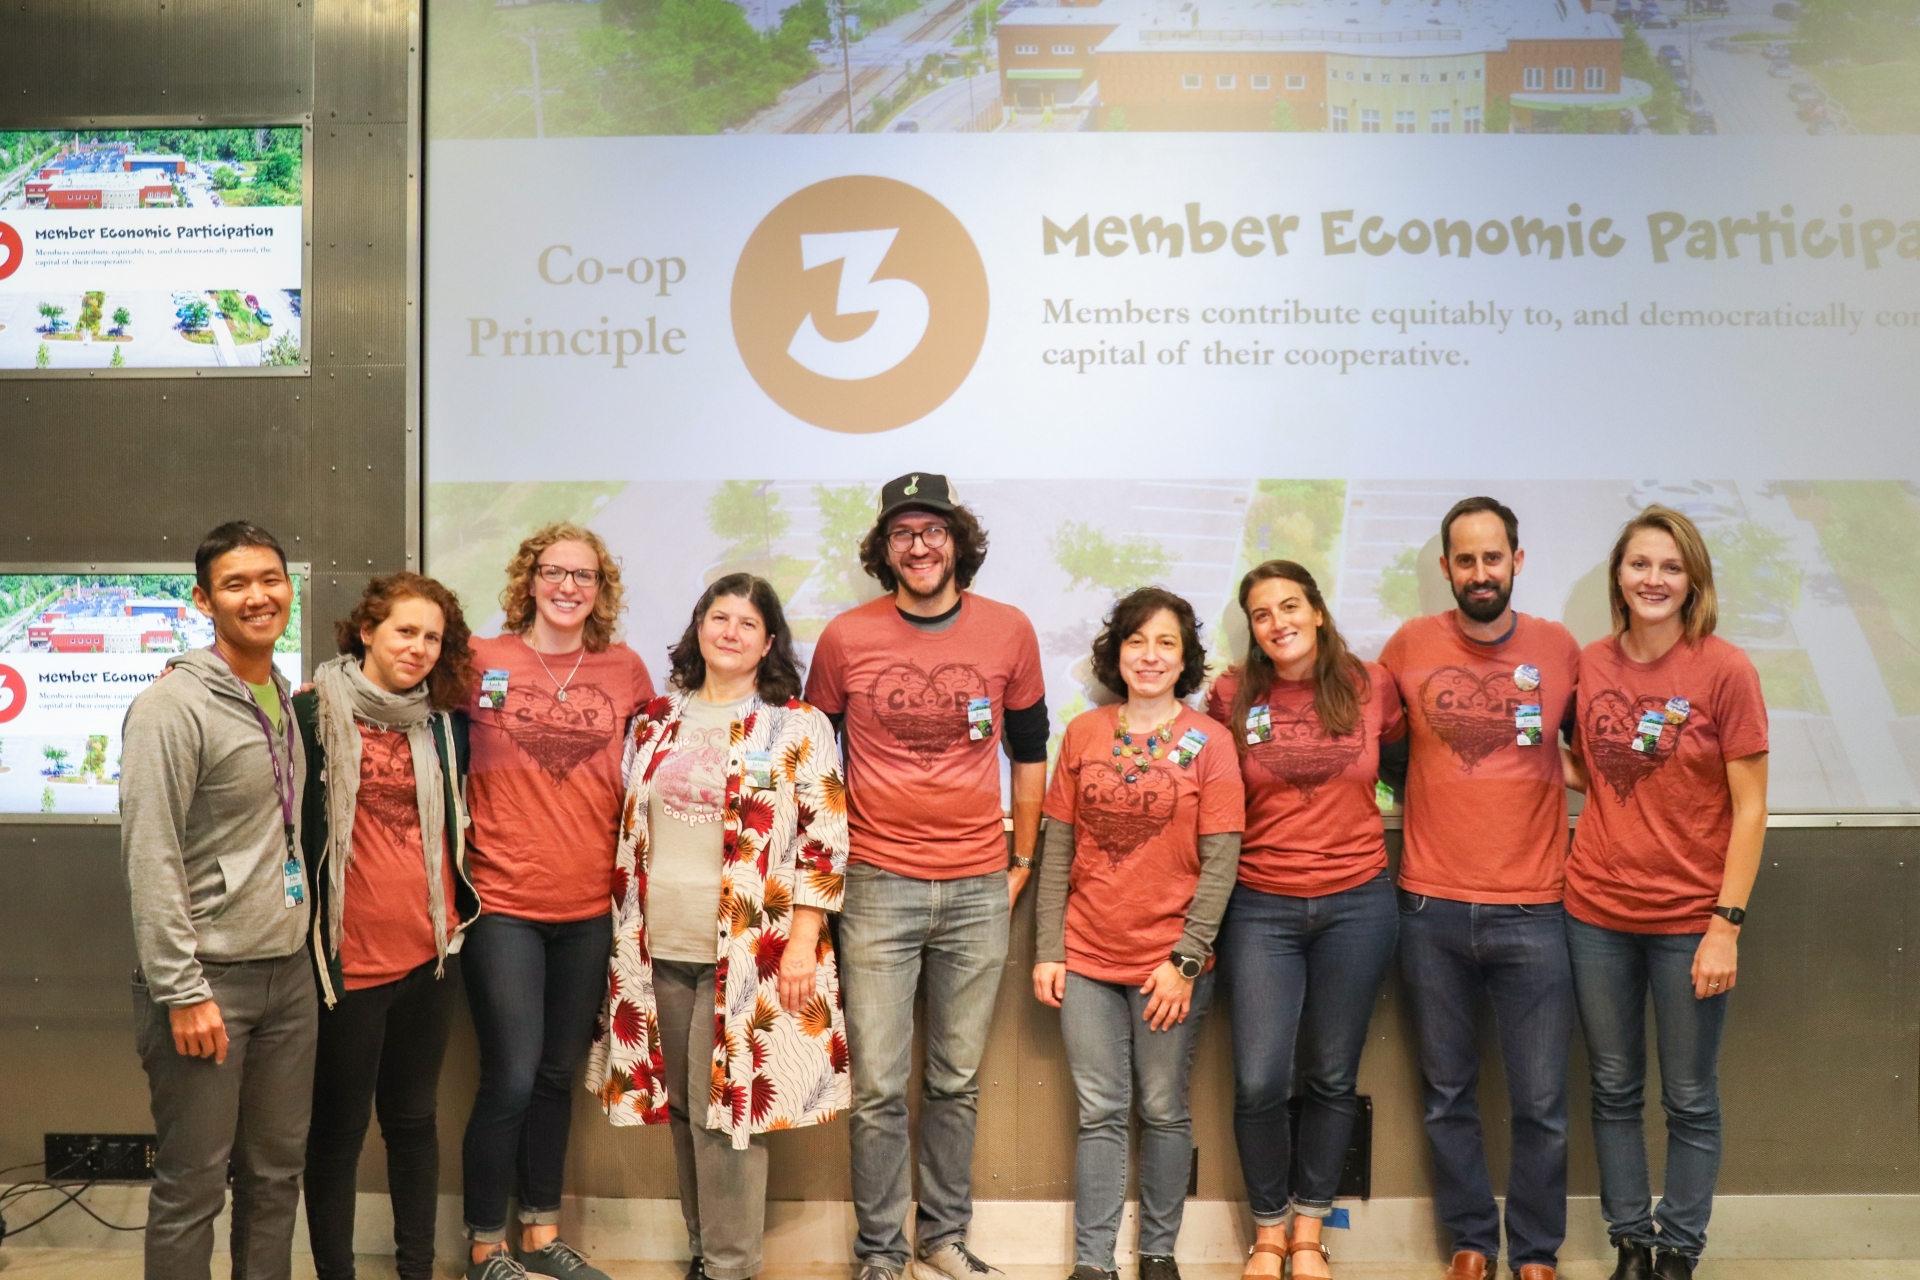 A row of nine people posing in front of a large projector screen. The graphic on the screen is faded and reads "Co-op Principle 3 Member Economic Participation." The number 3 is printed inside a rust red circle. The people